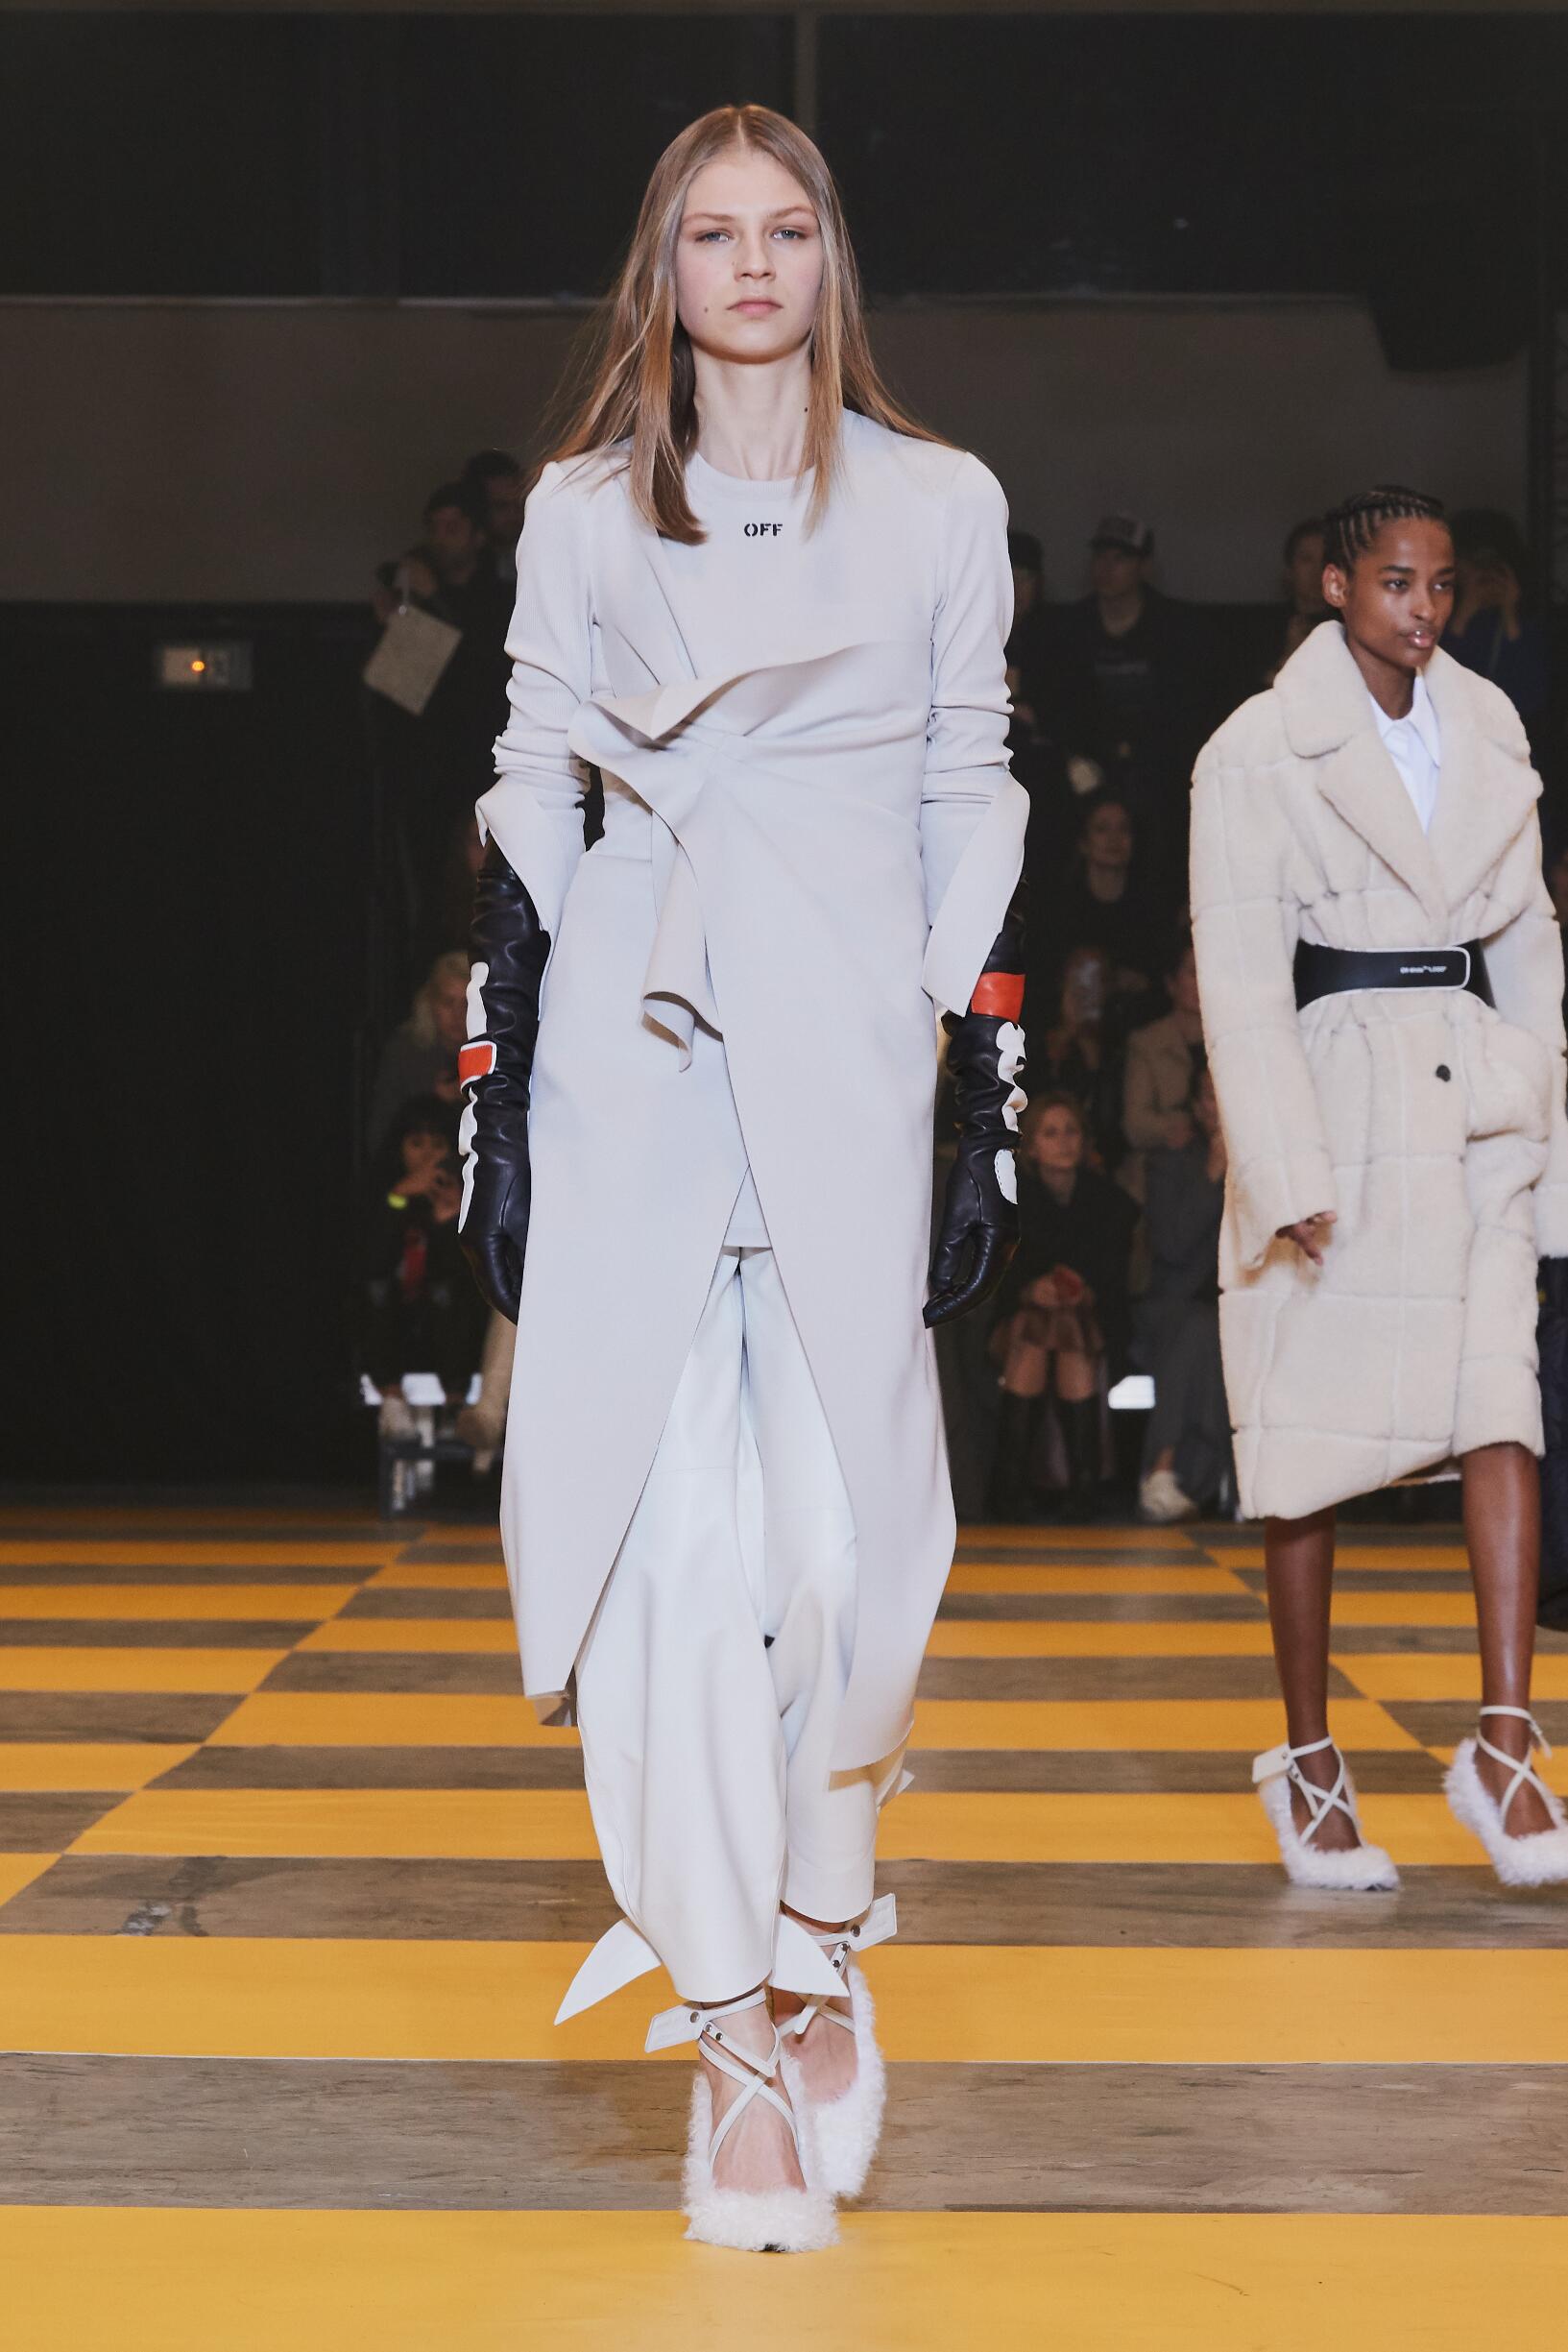 OFF-WHITE C/O VIRGIL ABLOH FALL WINTER 2019 WOMEN'S COLLECTION